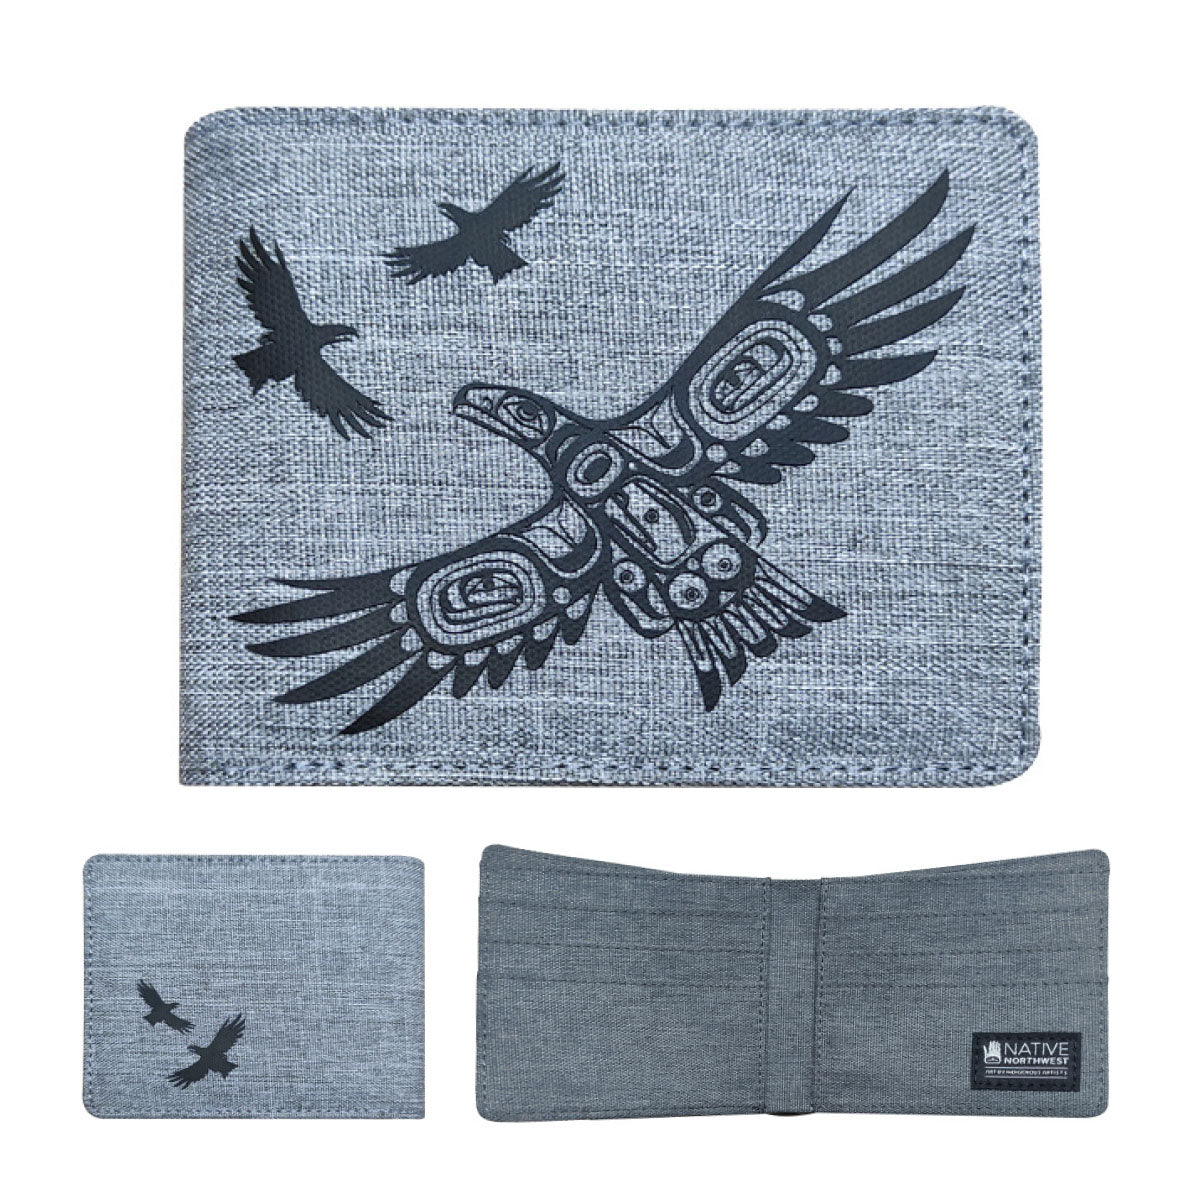 Wallet Soaring Eagle Blue - Wallet Soaring Eagle Blue -  - House of Himwitsa Native Art Gallery and Gifts